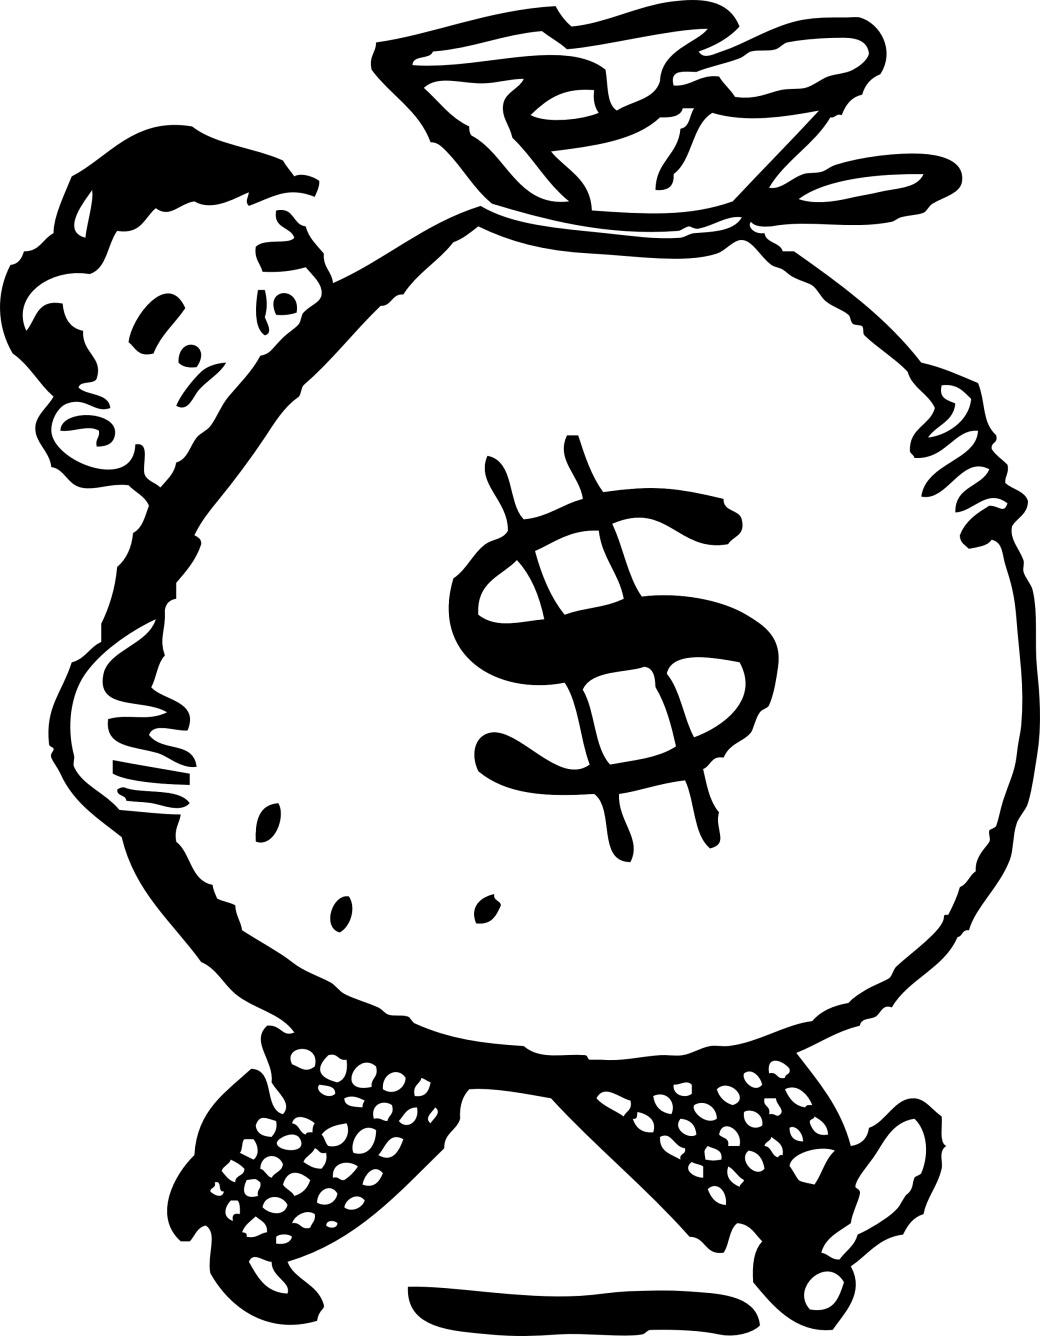 Free-clipart-dollar-signs-images-2